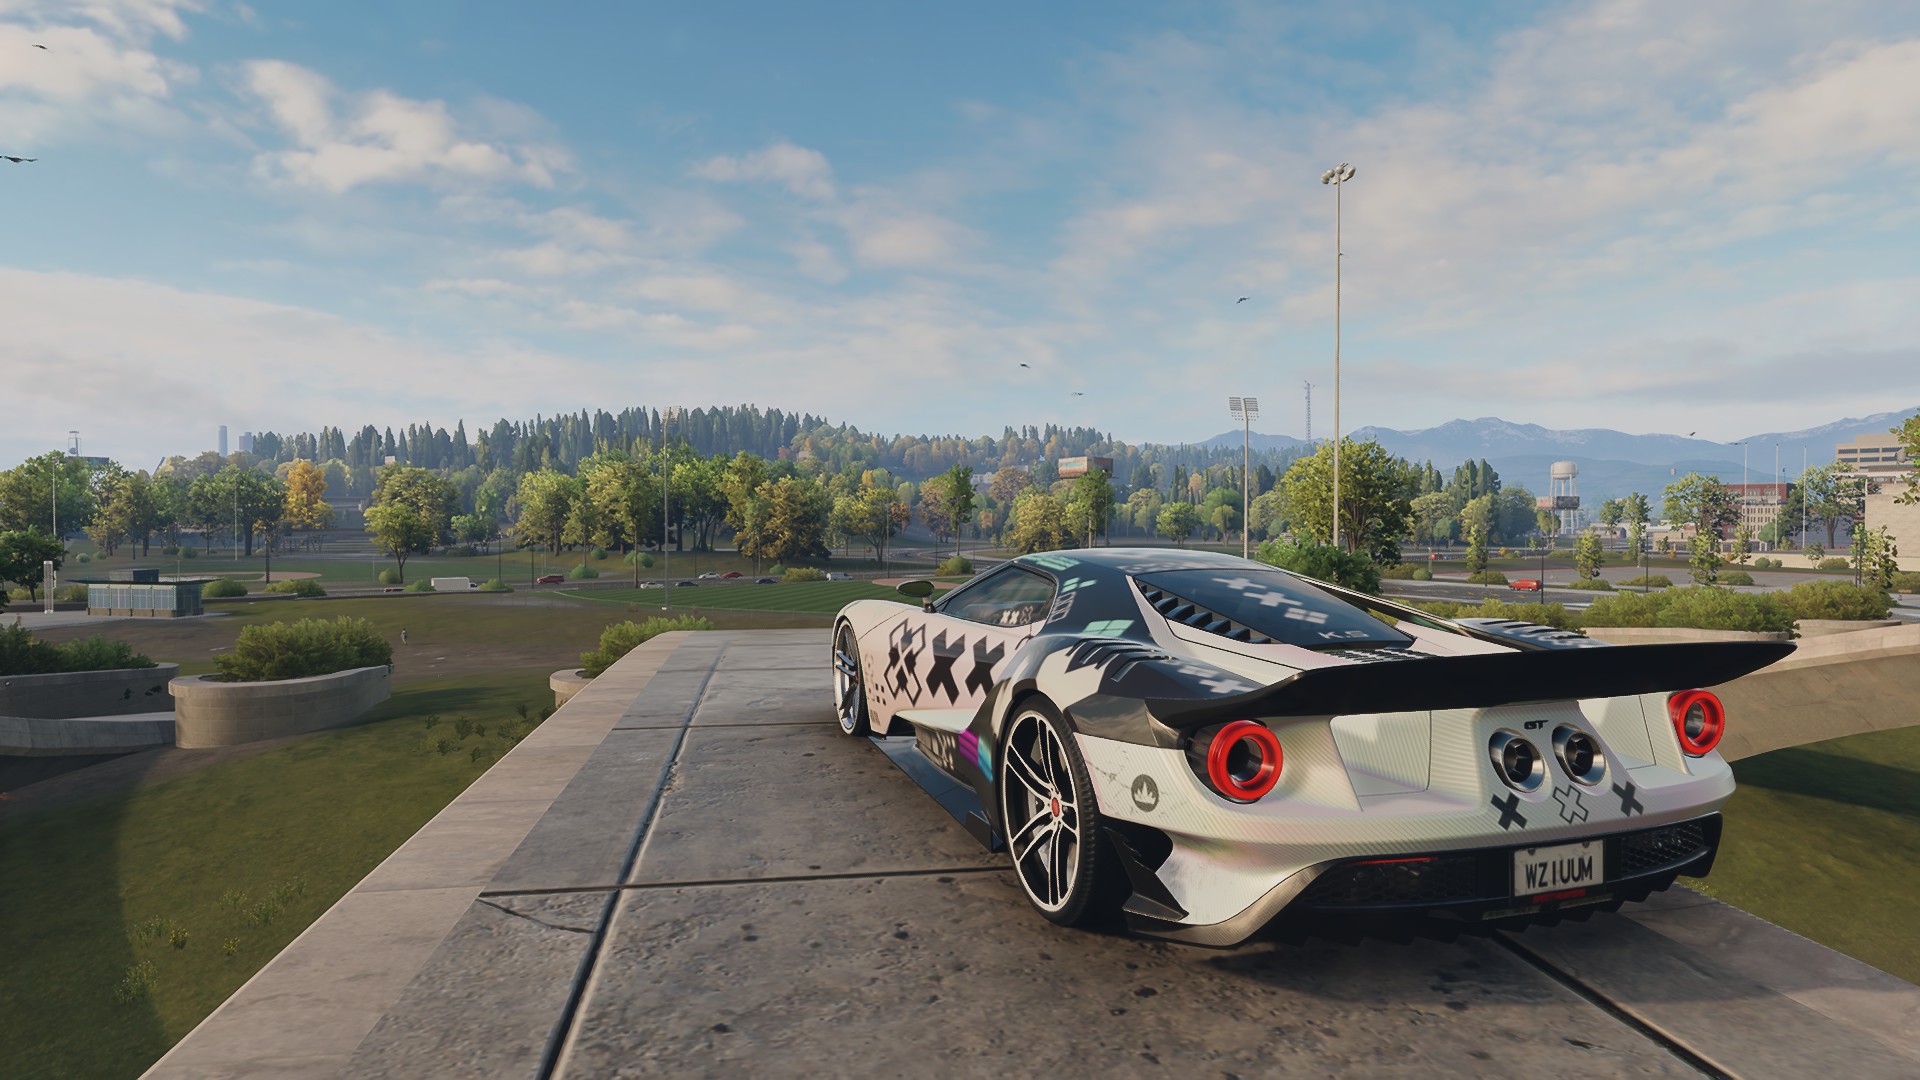 Need For Speed Unbound Clouds Ford GT Landscape Video Games Screen Shot Sky Rear View Licence Plates 1920x1080